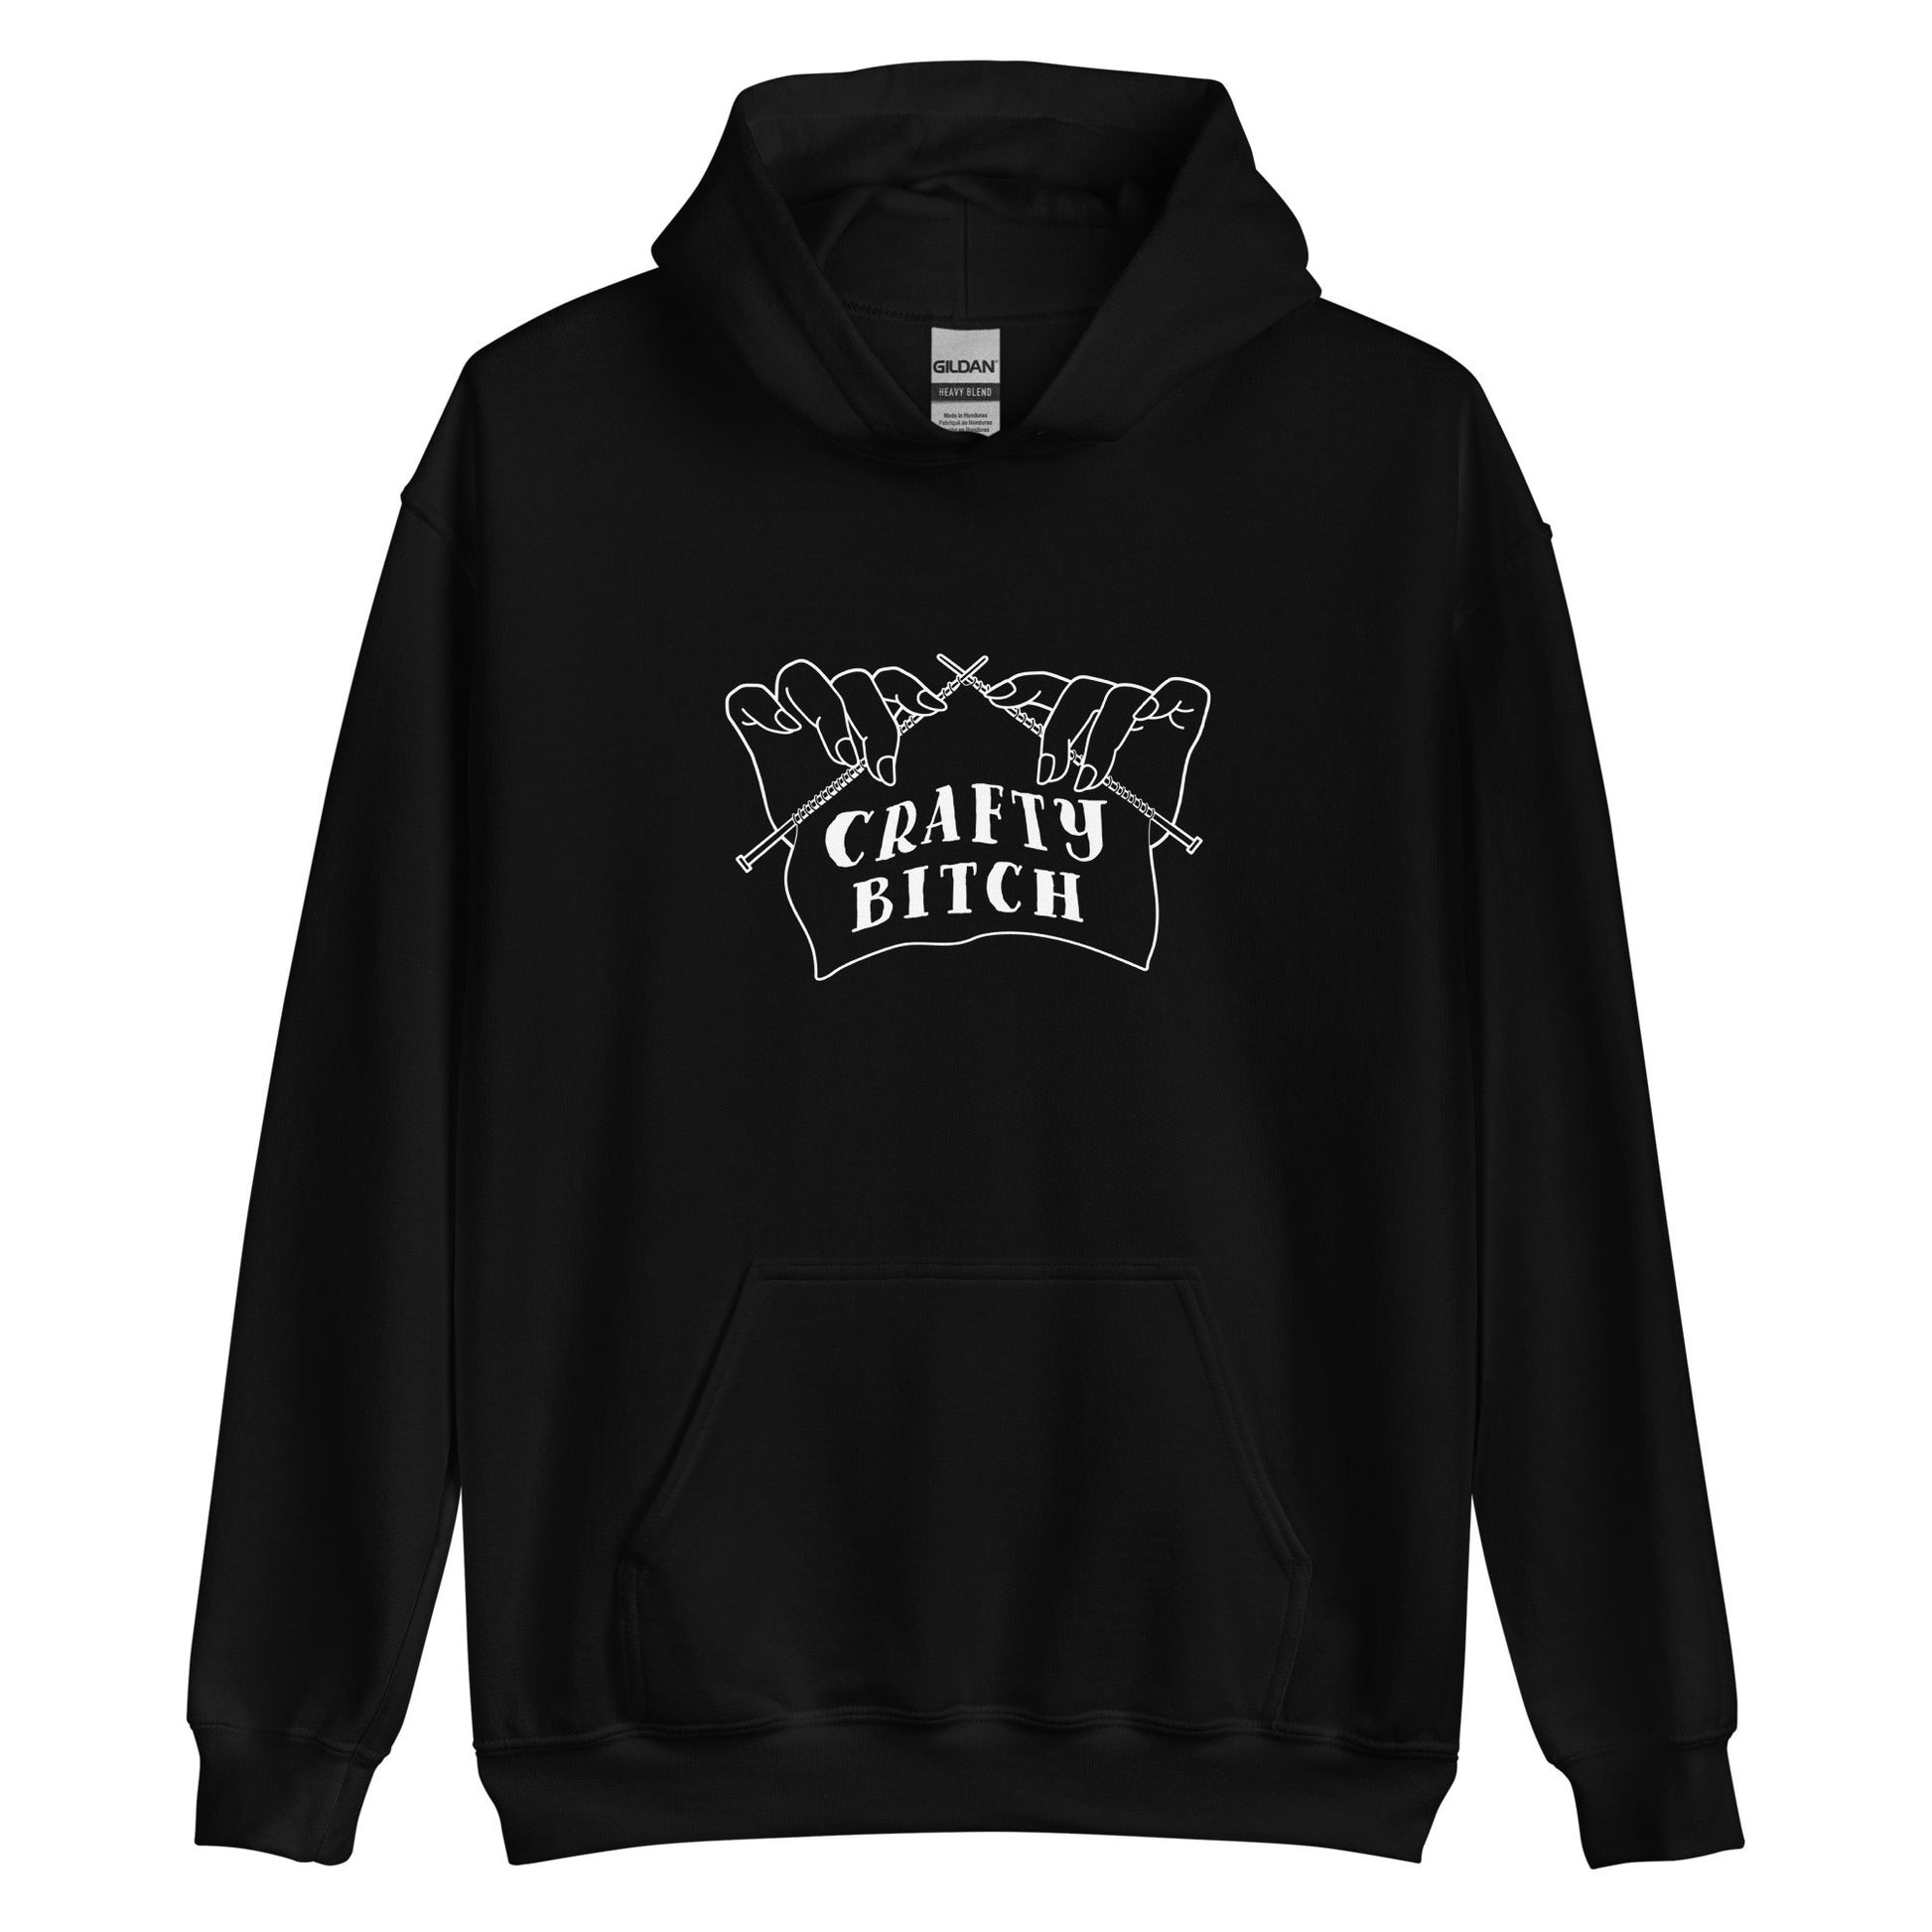 A black hooded sweatshirt featuring a single-color illustration of a pair of hands holding knitting needles. Fabric on the needles features text that reads "crafty bitch".